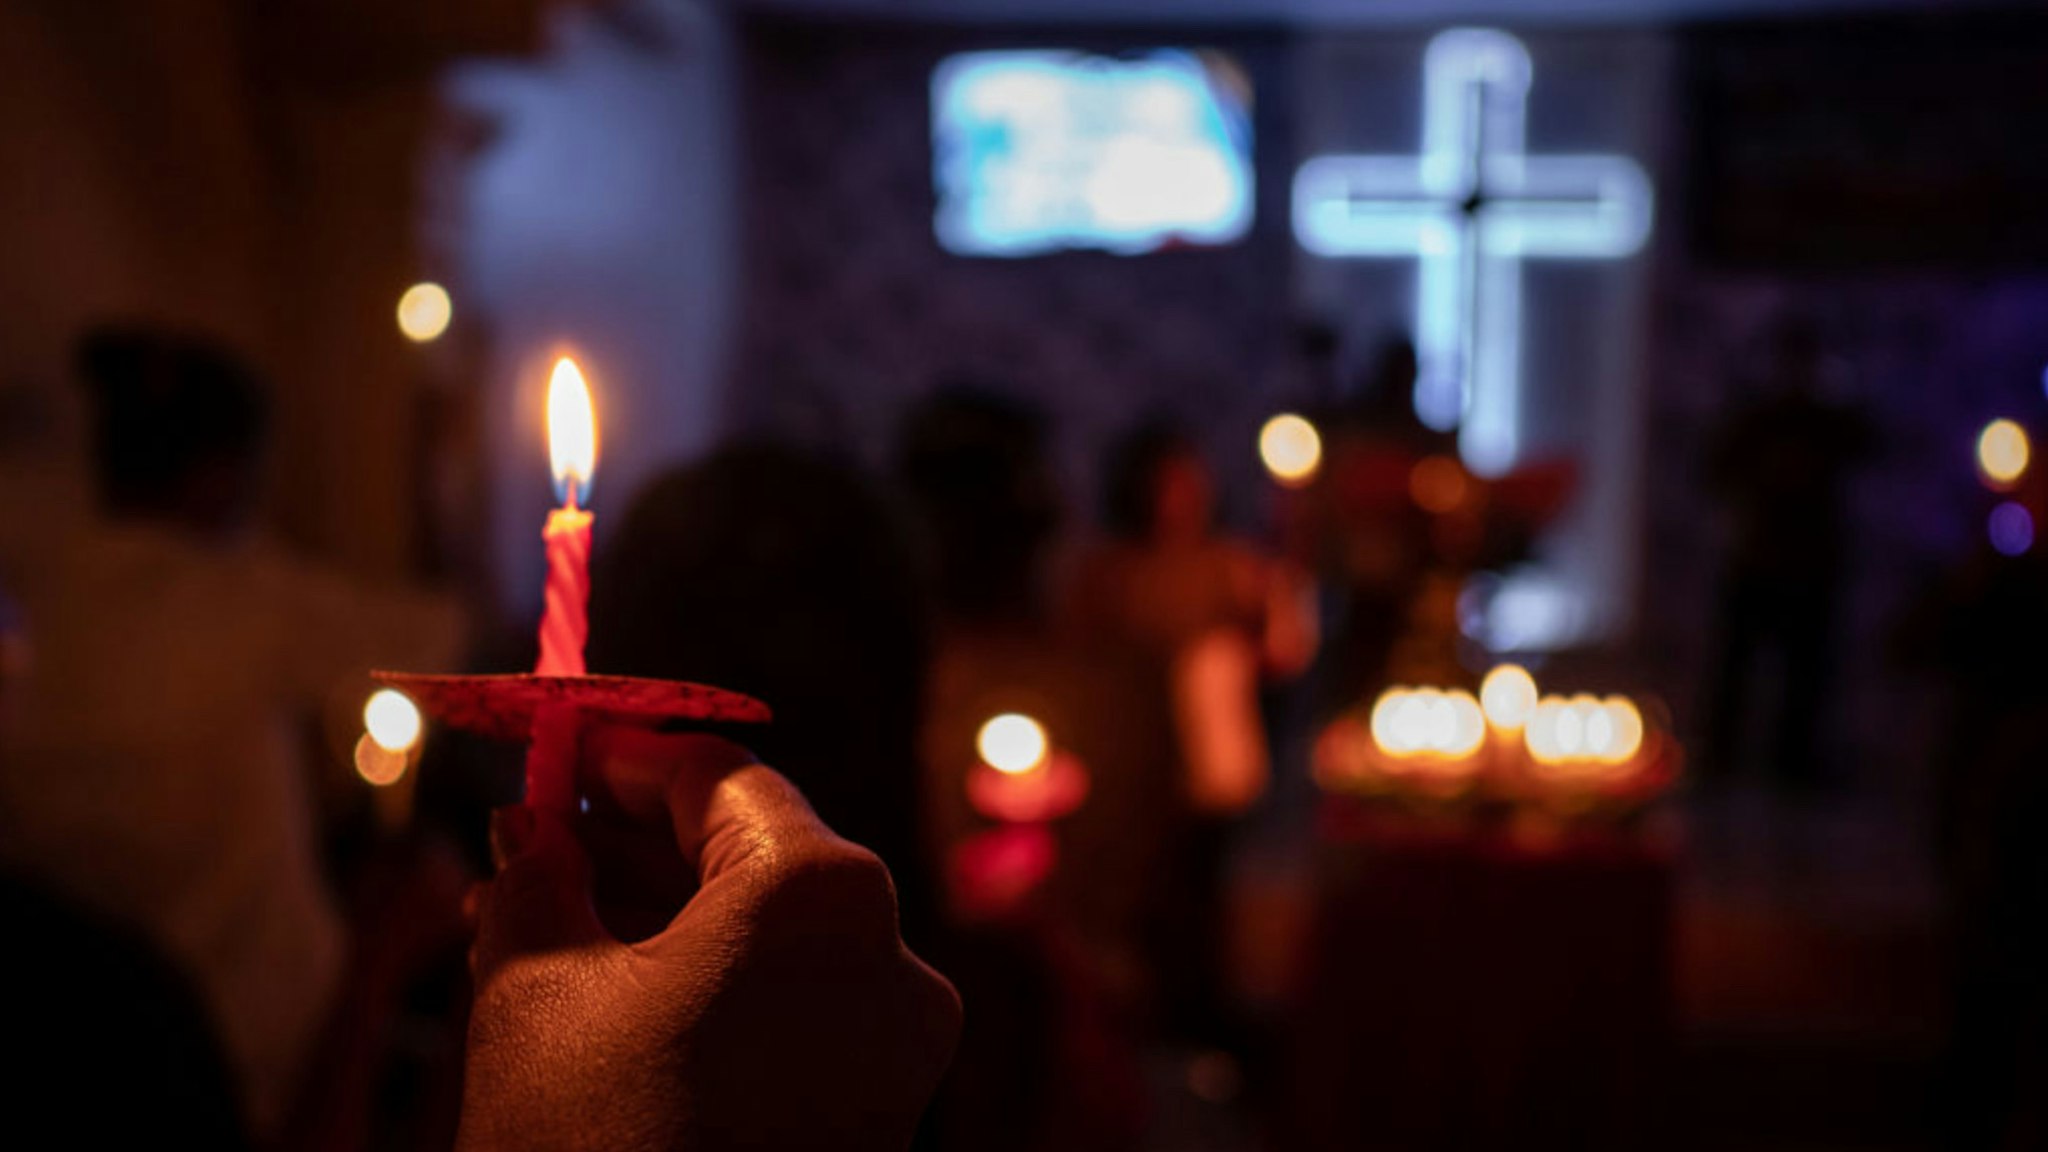 Christians hold candles during Christmas Eve mass at a church on December 25, 2018 in Carita, Banten province, Indonesia.